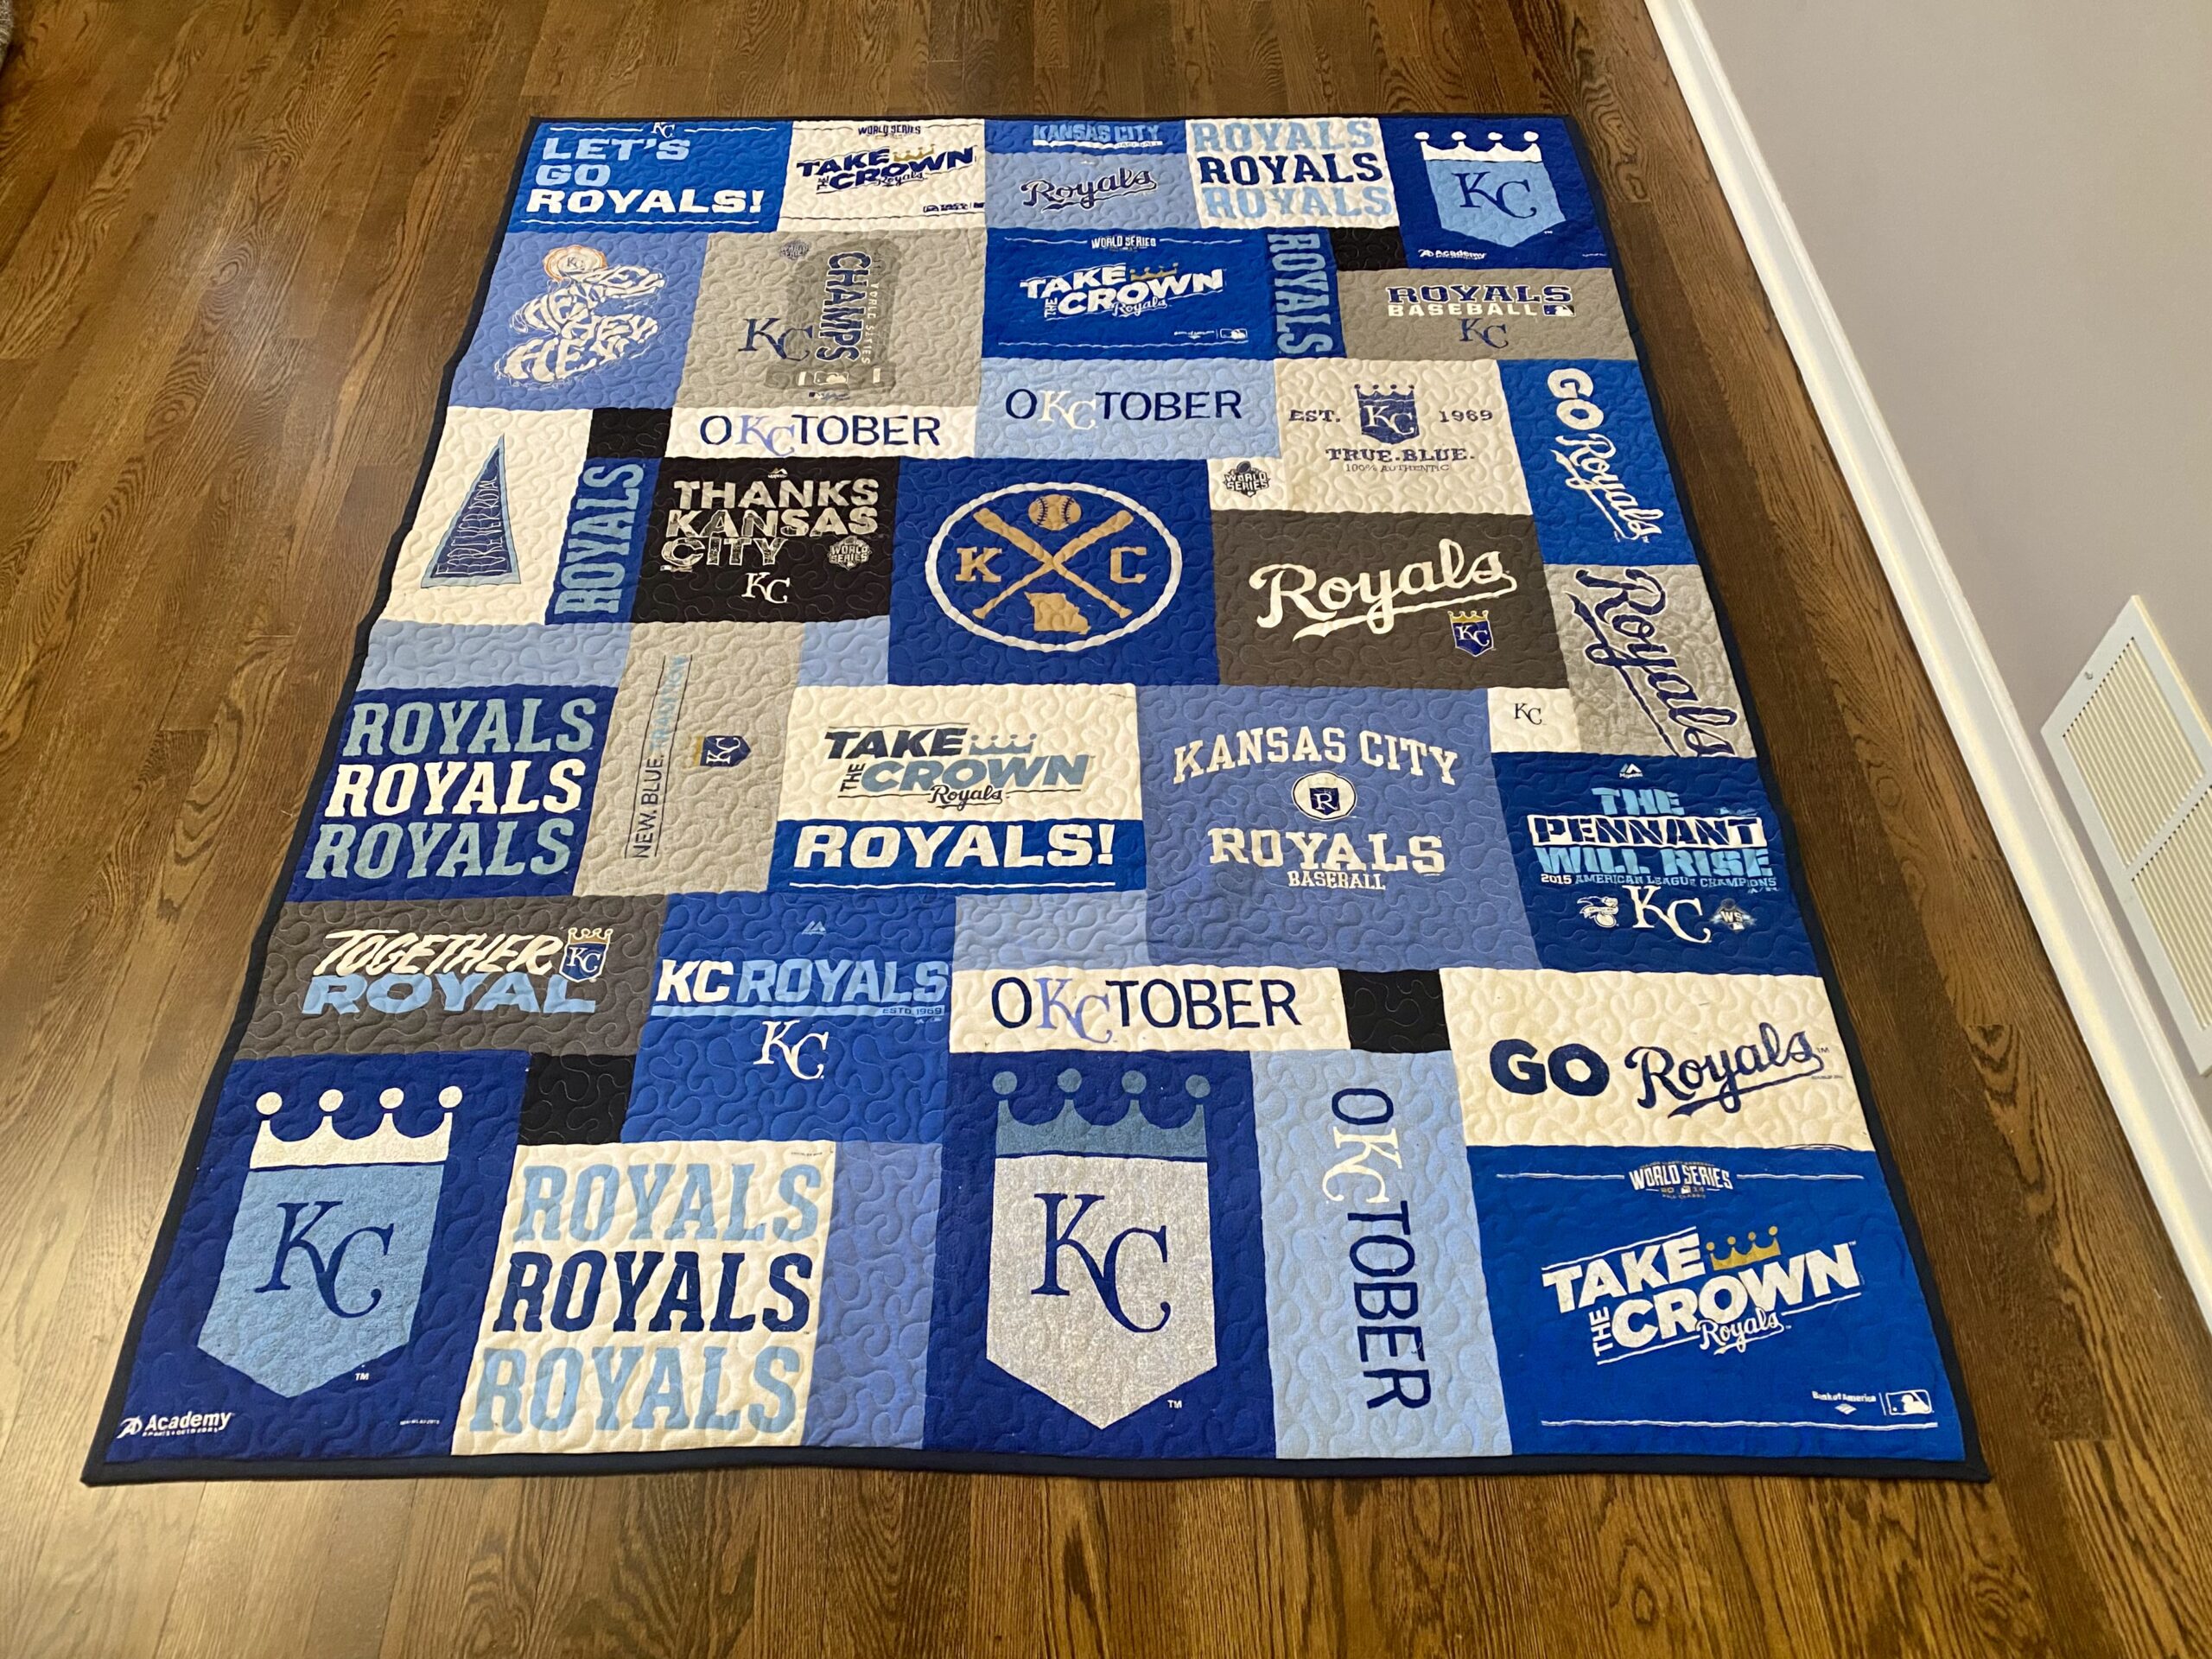 A rug with all the teams logos on it